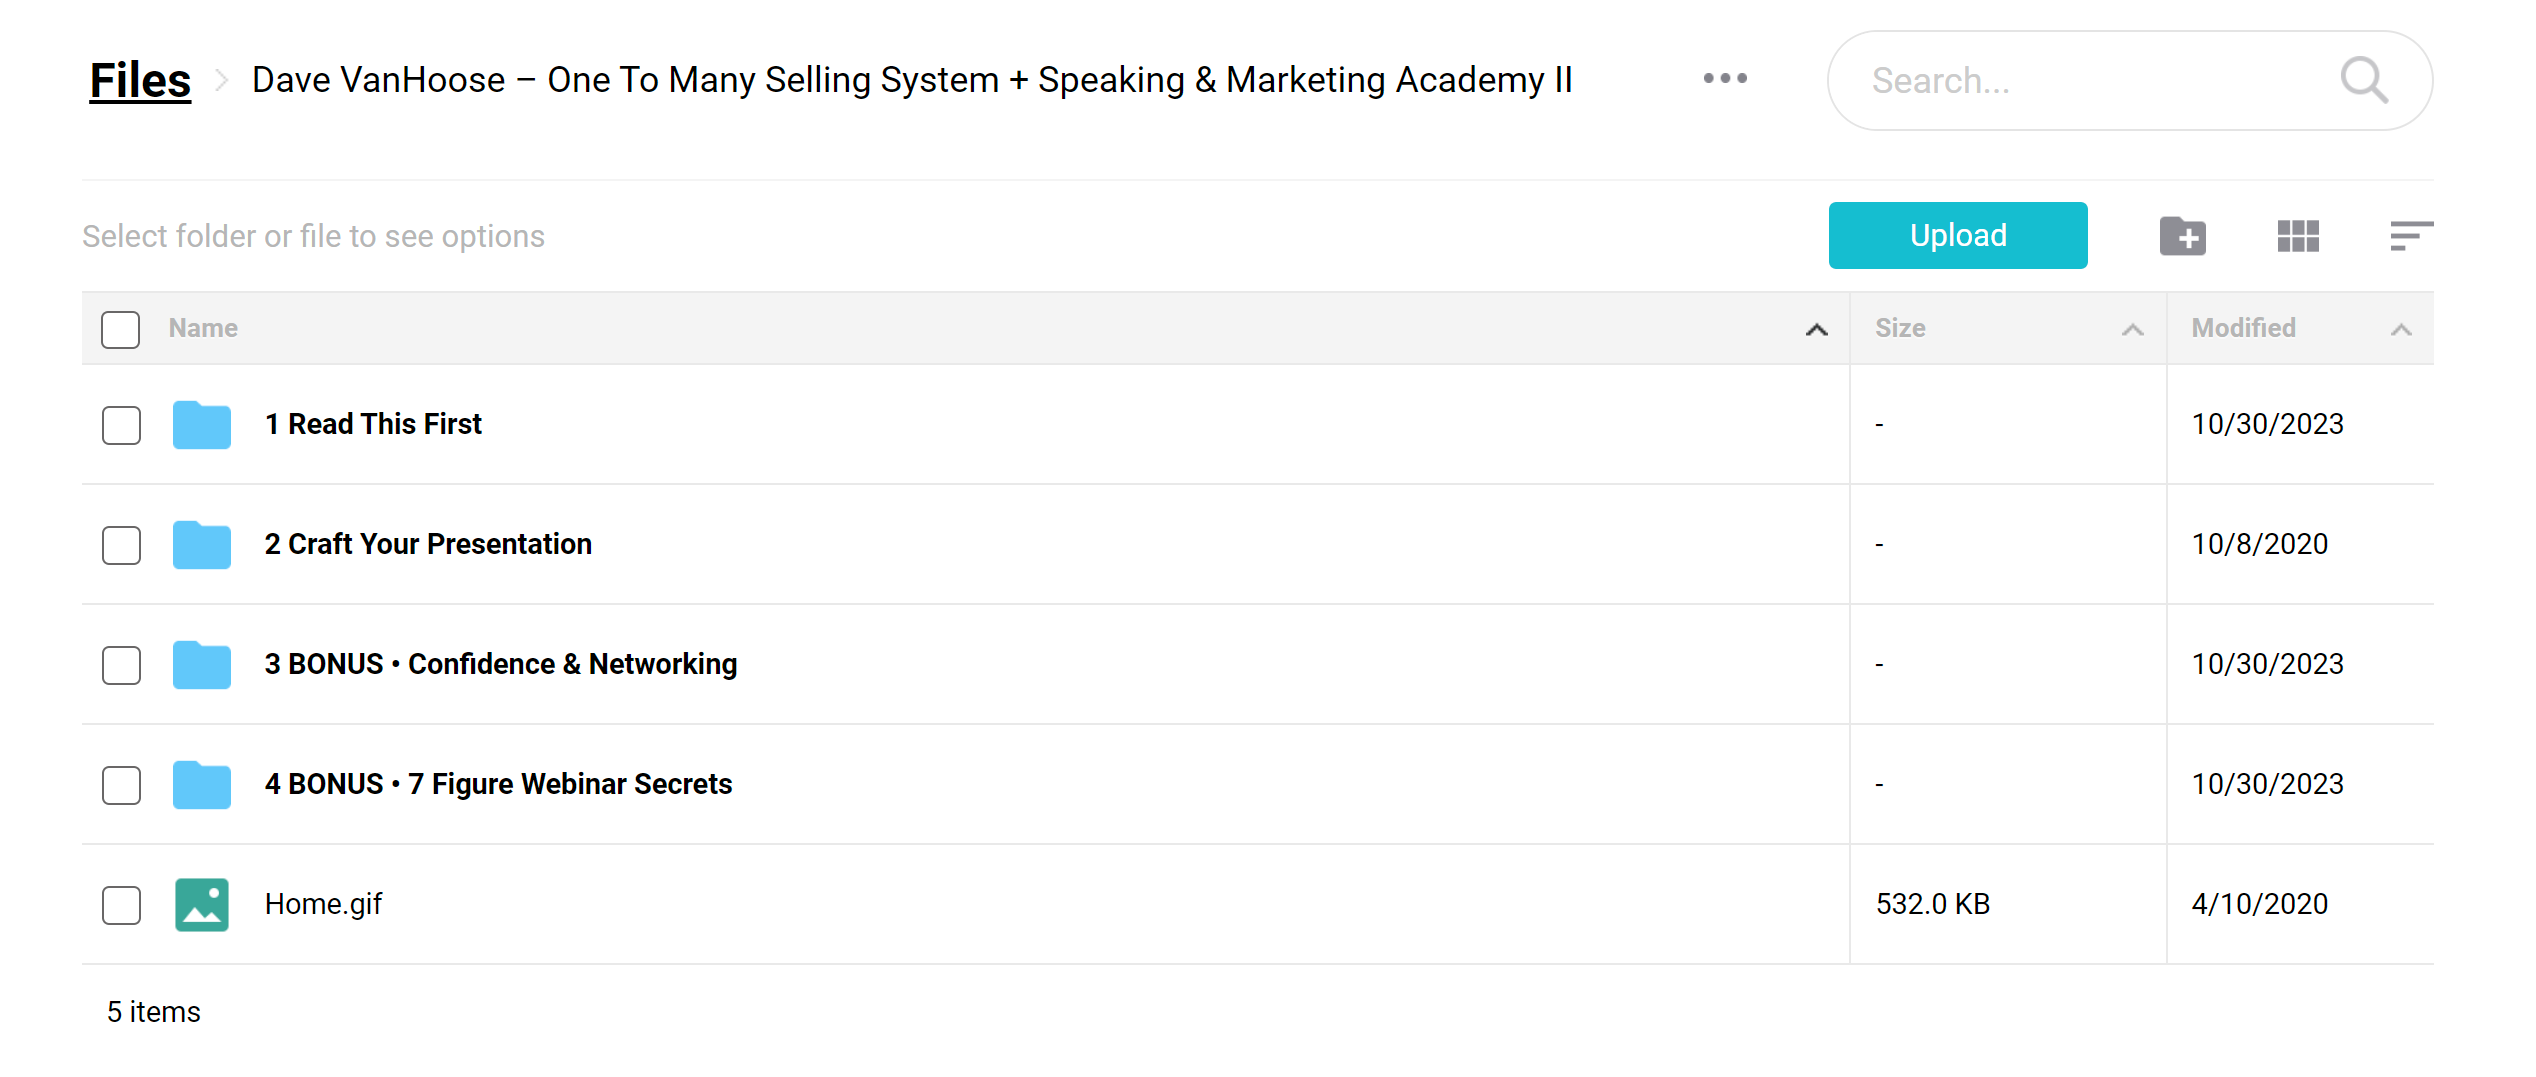 Dave VanHoose One To Many Selling System + Speaking & Marketing Academy Course